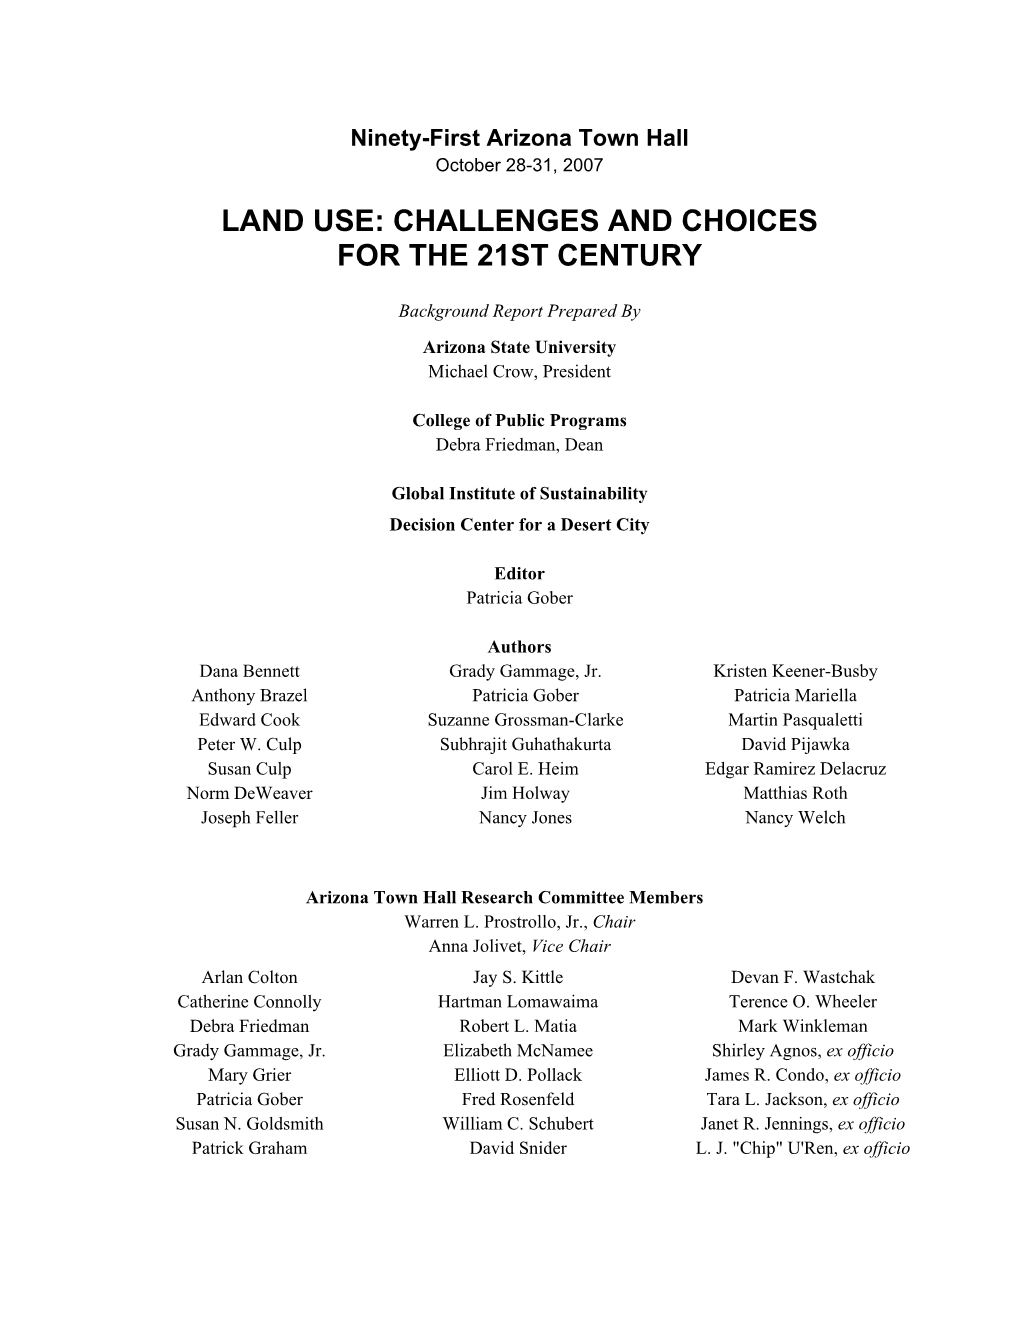 Land Use: Challenges and Choices for the 21St Century